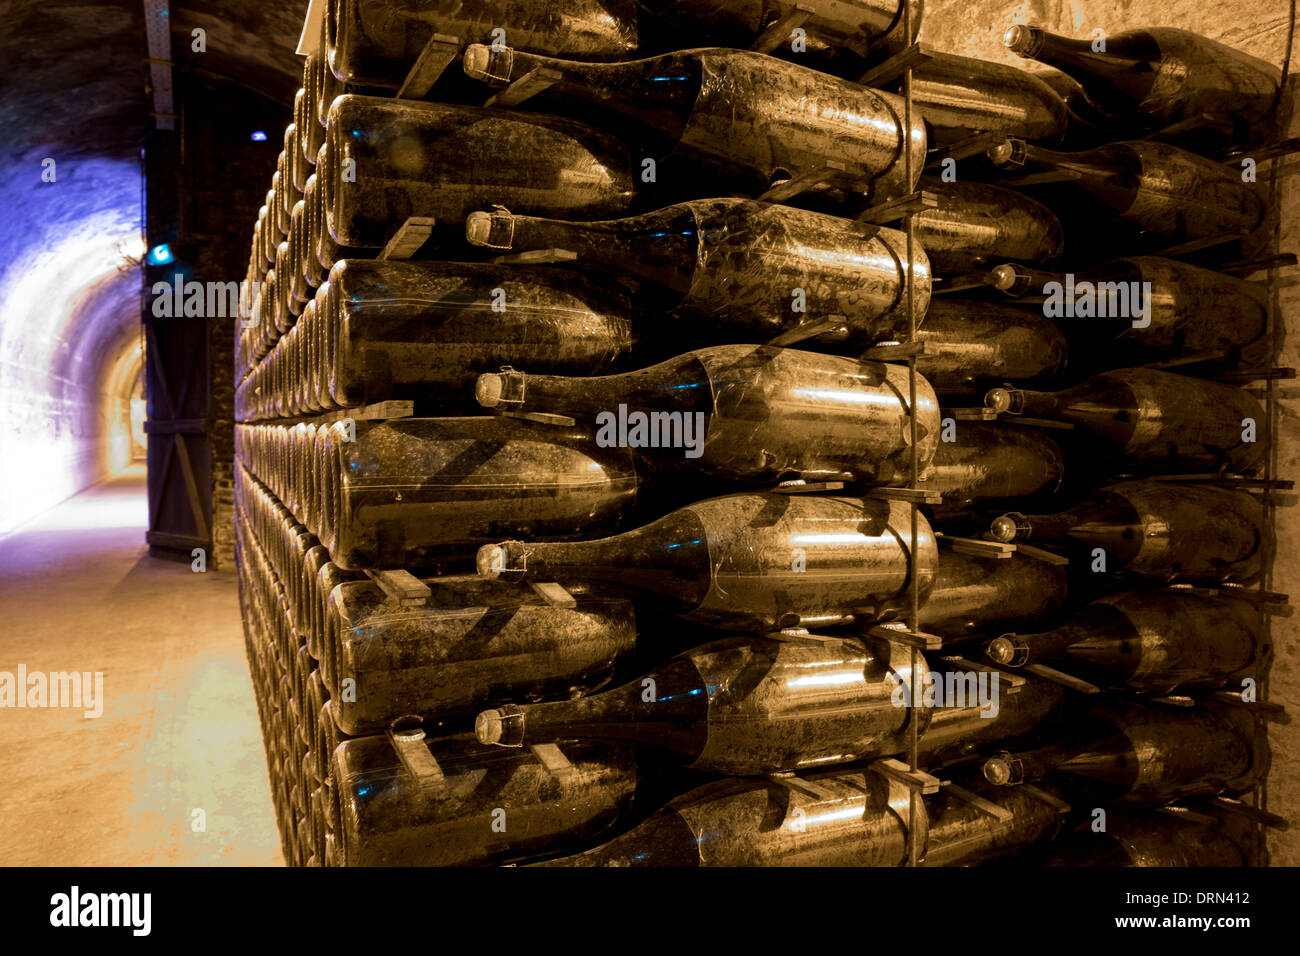 Methuselah bottles stacked and ageing in caves of Champagne Taittinger in Reims, Champagne-Ardenne, France Stock Photo